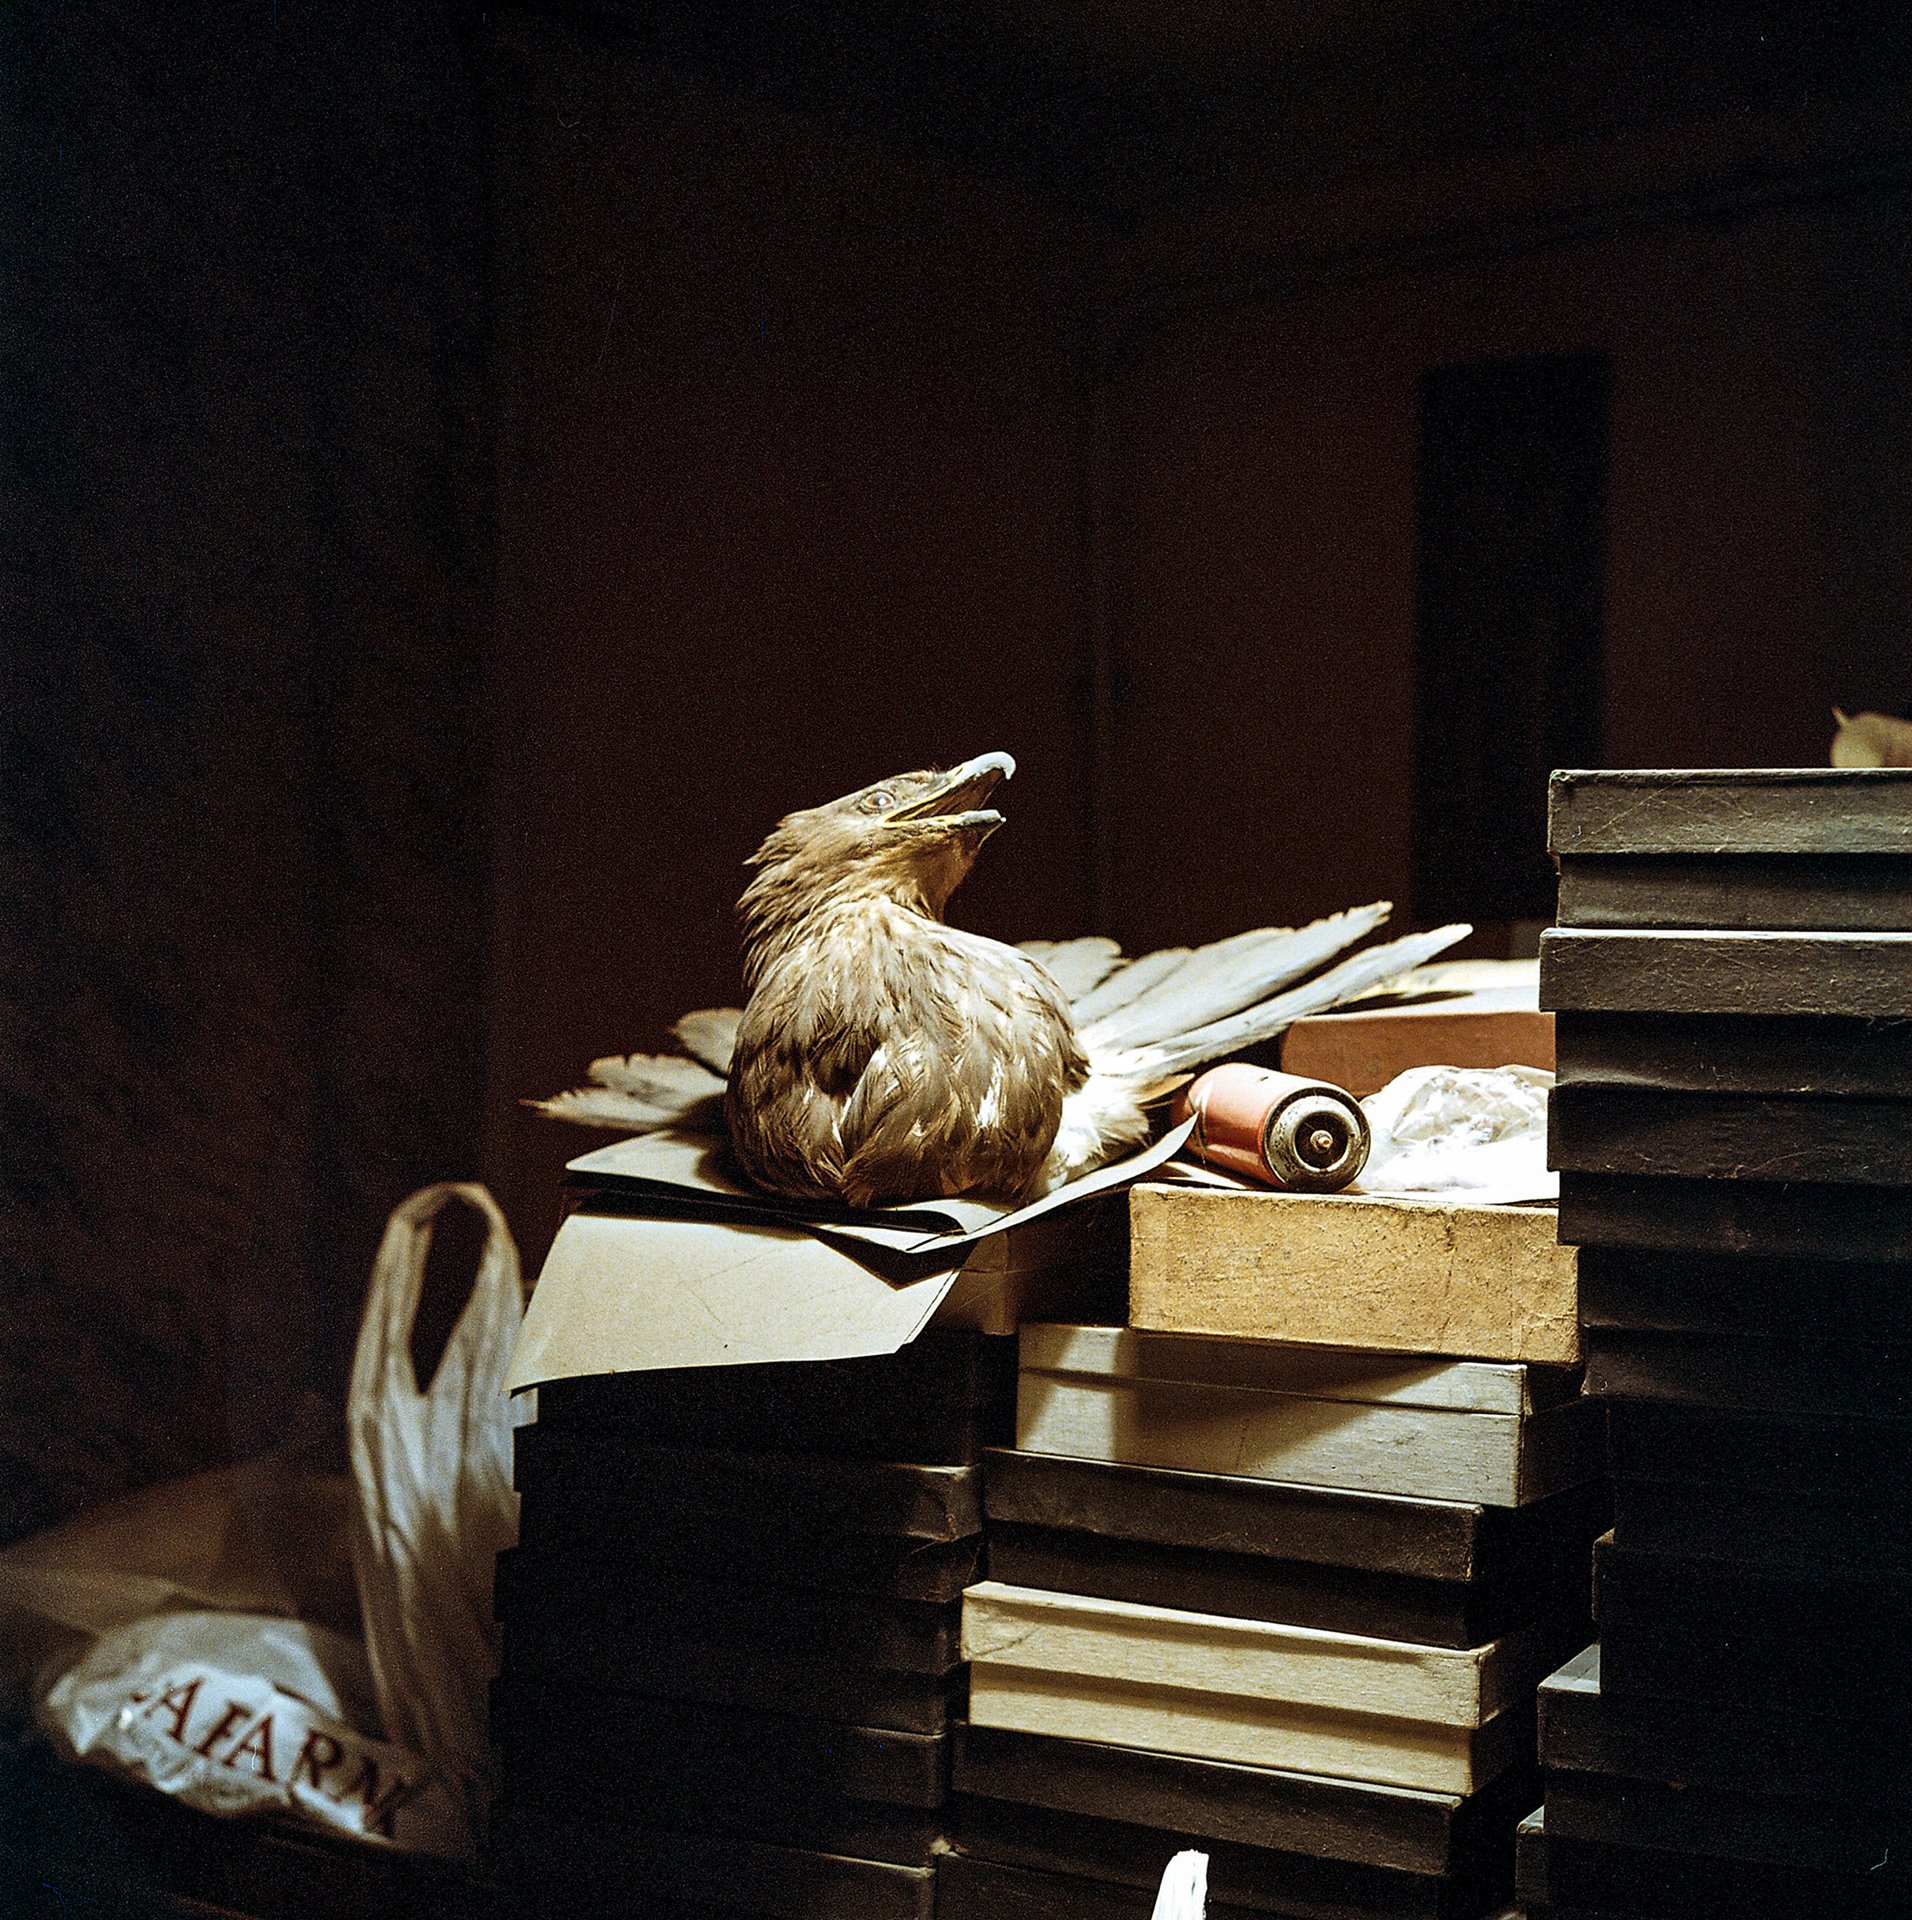 A taxidermied eagle rests on top of boxes of preserved butterflies in Parkev Kazarian&rsquo;s home. As violence broke out on the streets of Sumgait in 1988, Kazarian and his family left Baku (just 30 km away) a year later, bringing eleven boxes of his most precious butterflies and little else. They settled in the village of Tzhogamark north of Gyumri, Armenia.